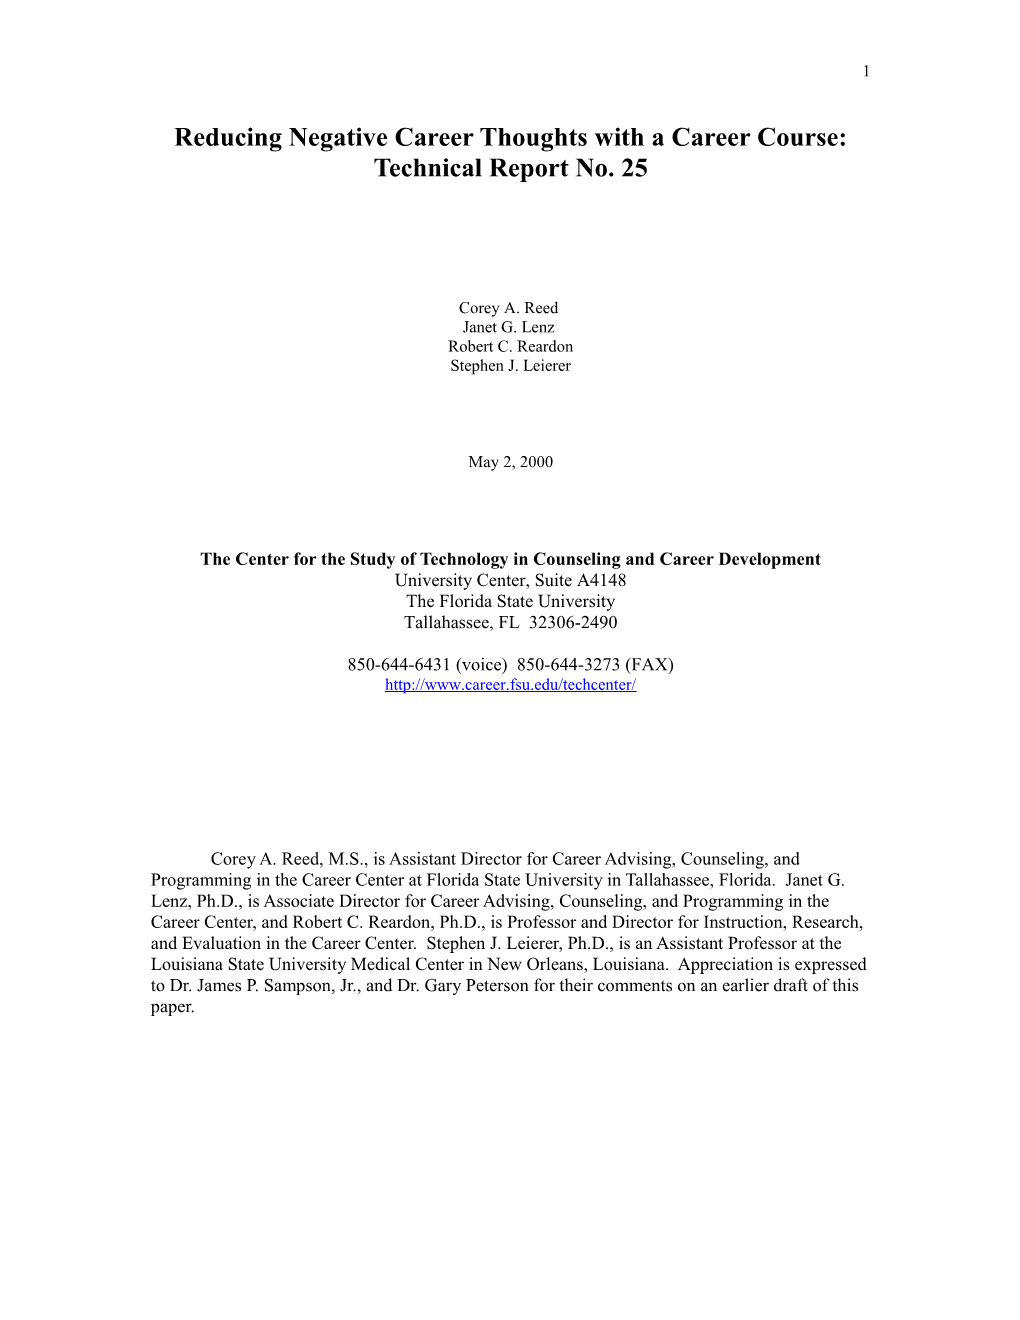 Reducing Negative Career Thoughts with a Career Course: Technical Report No